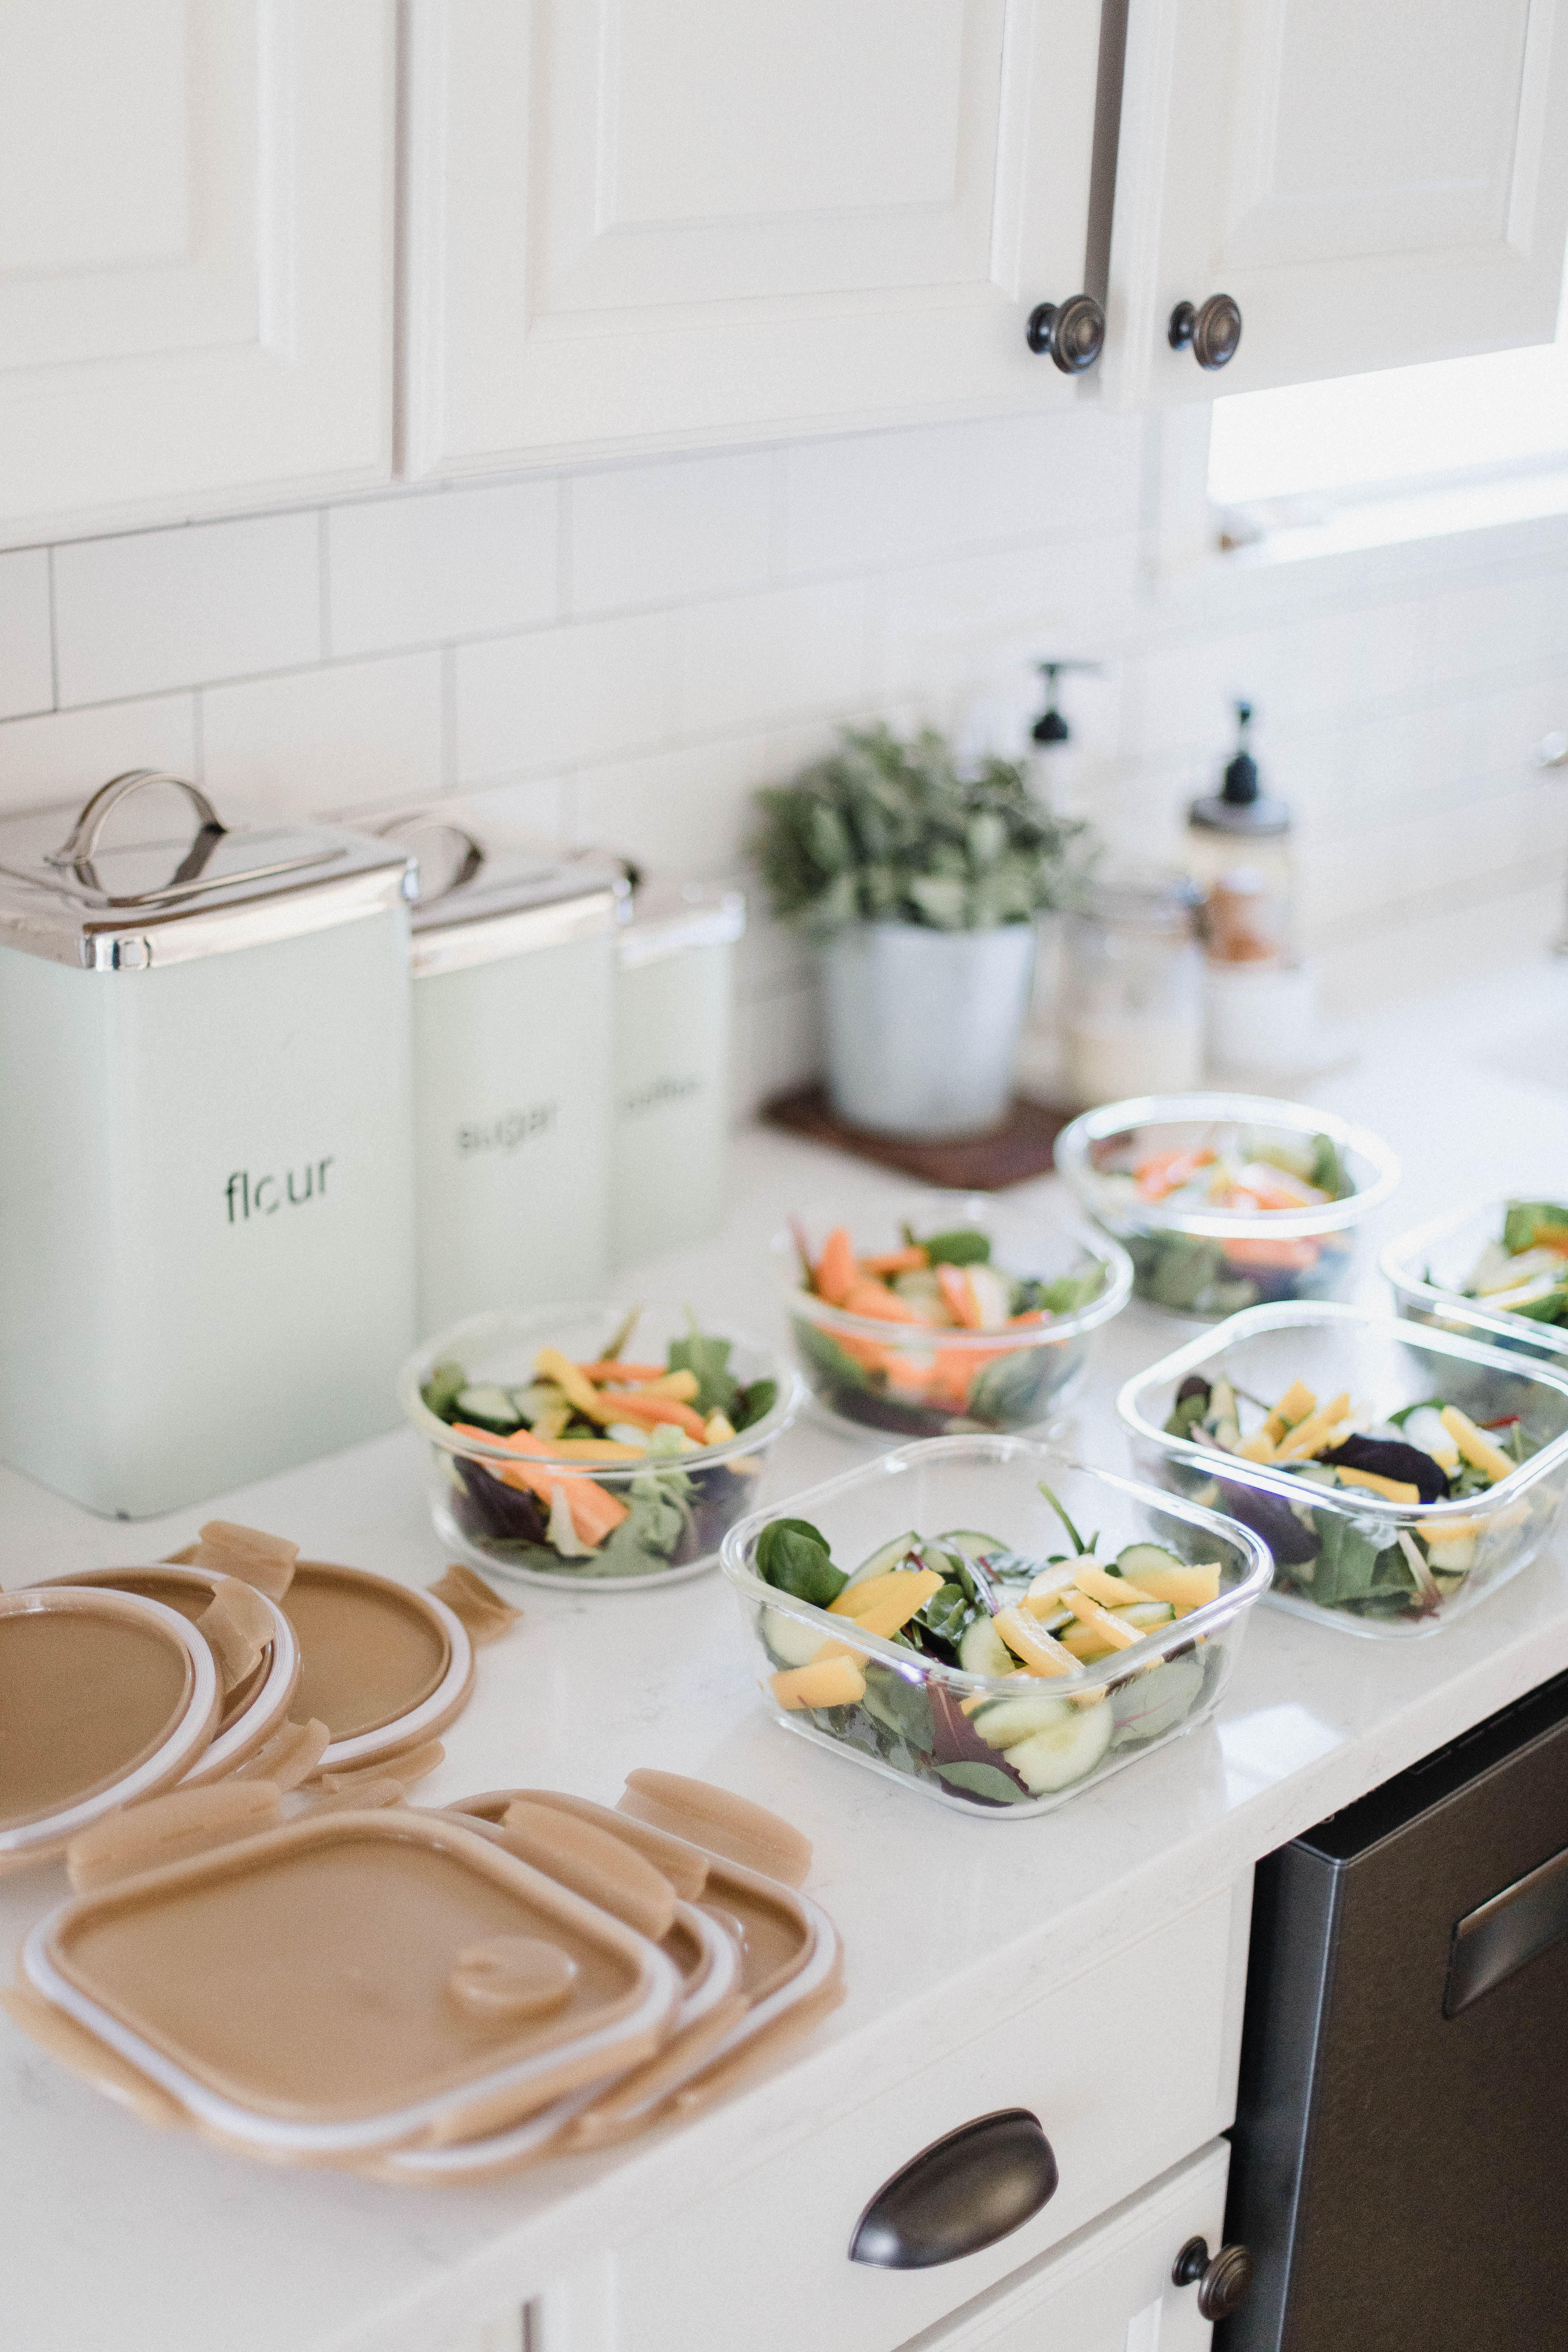 Connecticut life and style blogger Lauren McBride shares her fitness essentials for the new year, including wireless headphones, meal prepping containers, and a fitness tracker.